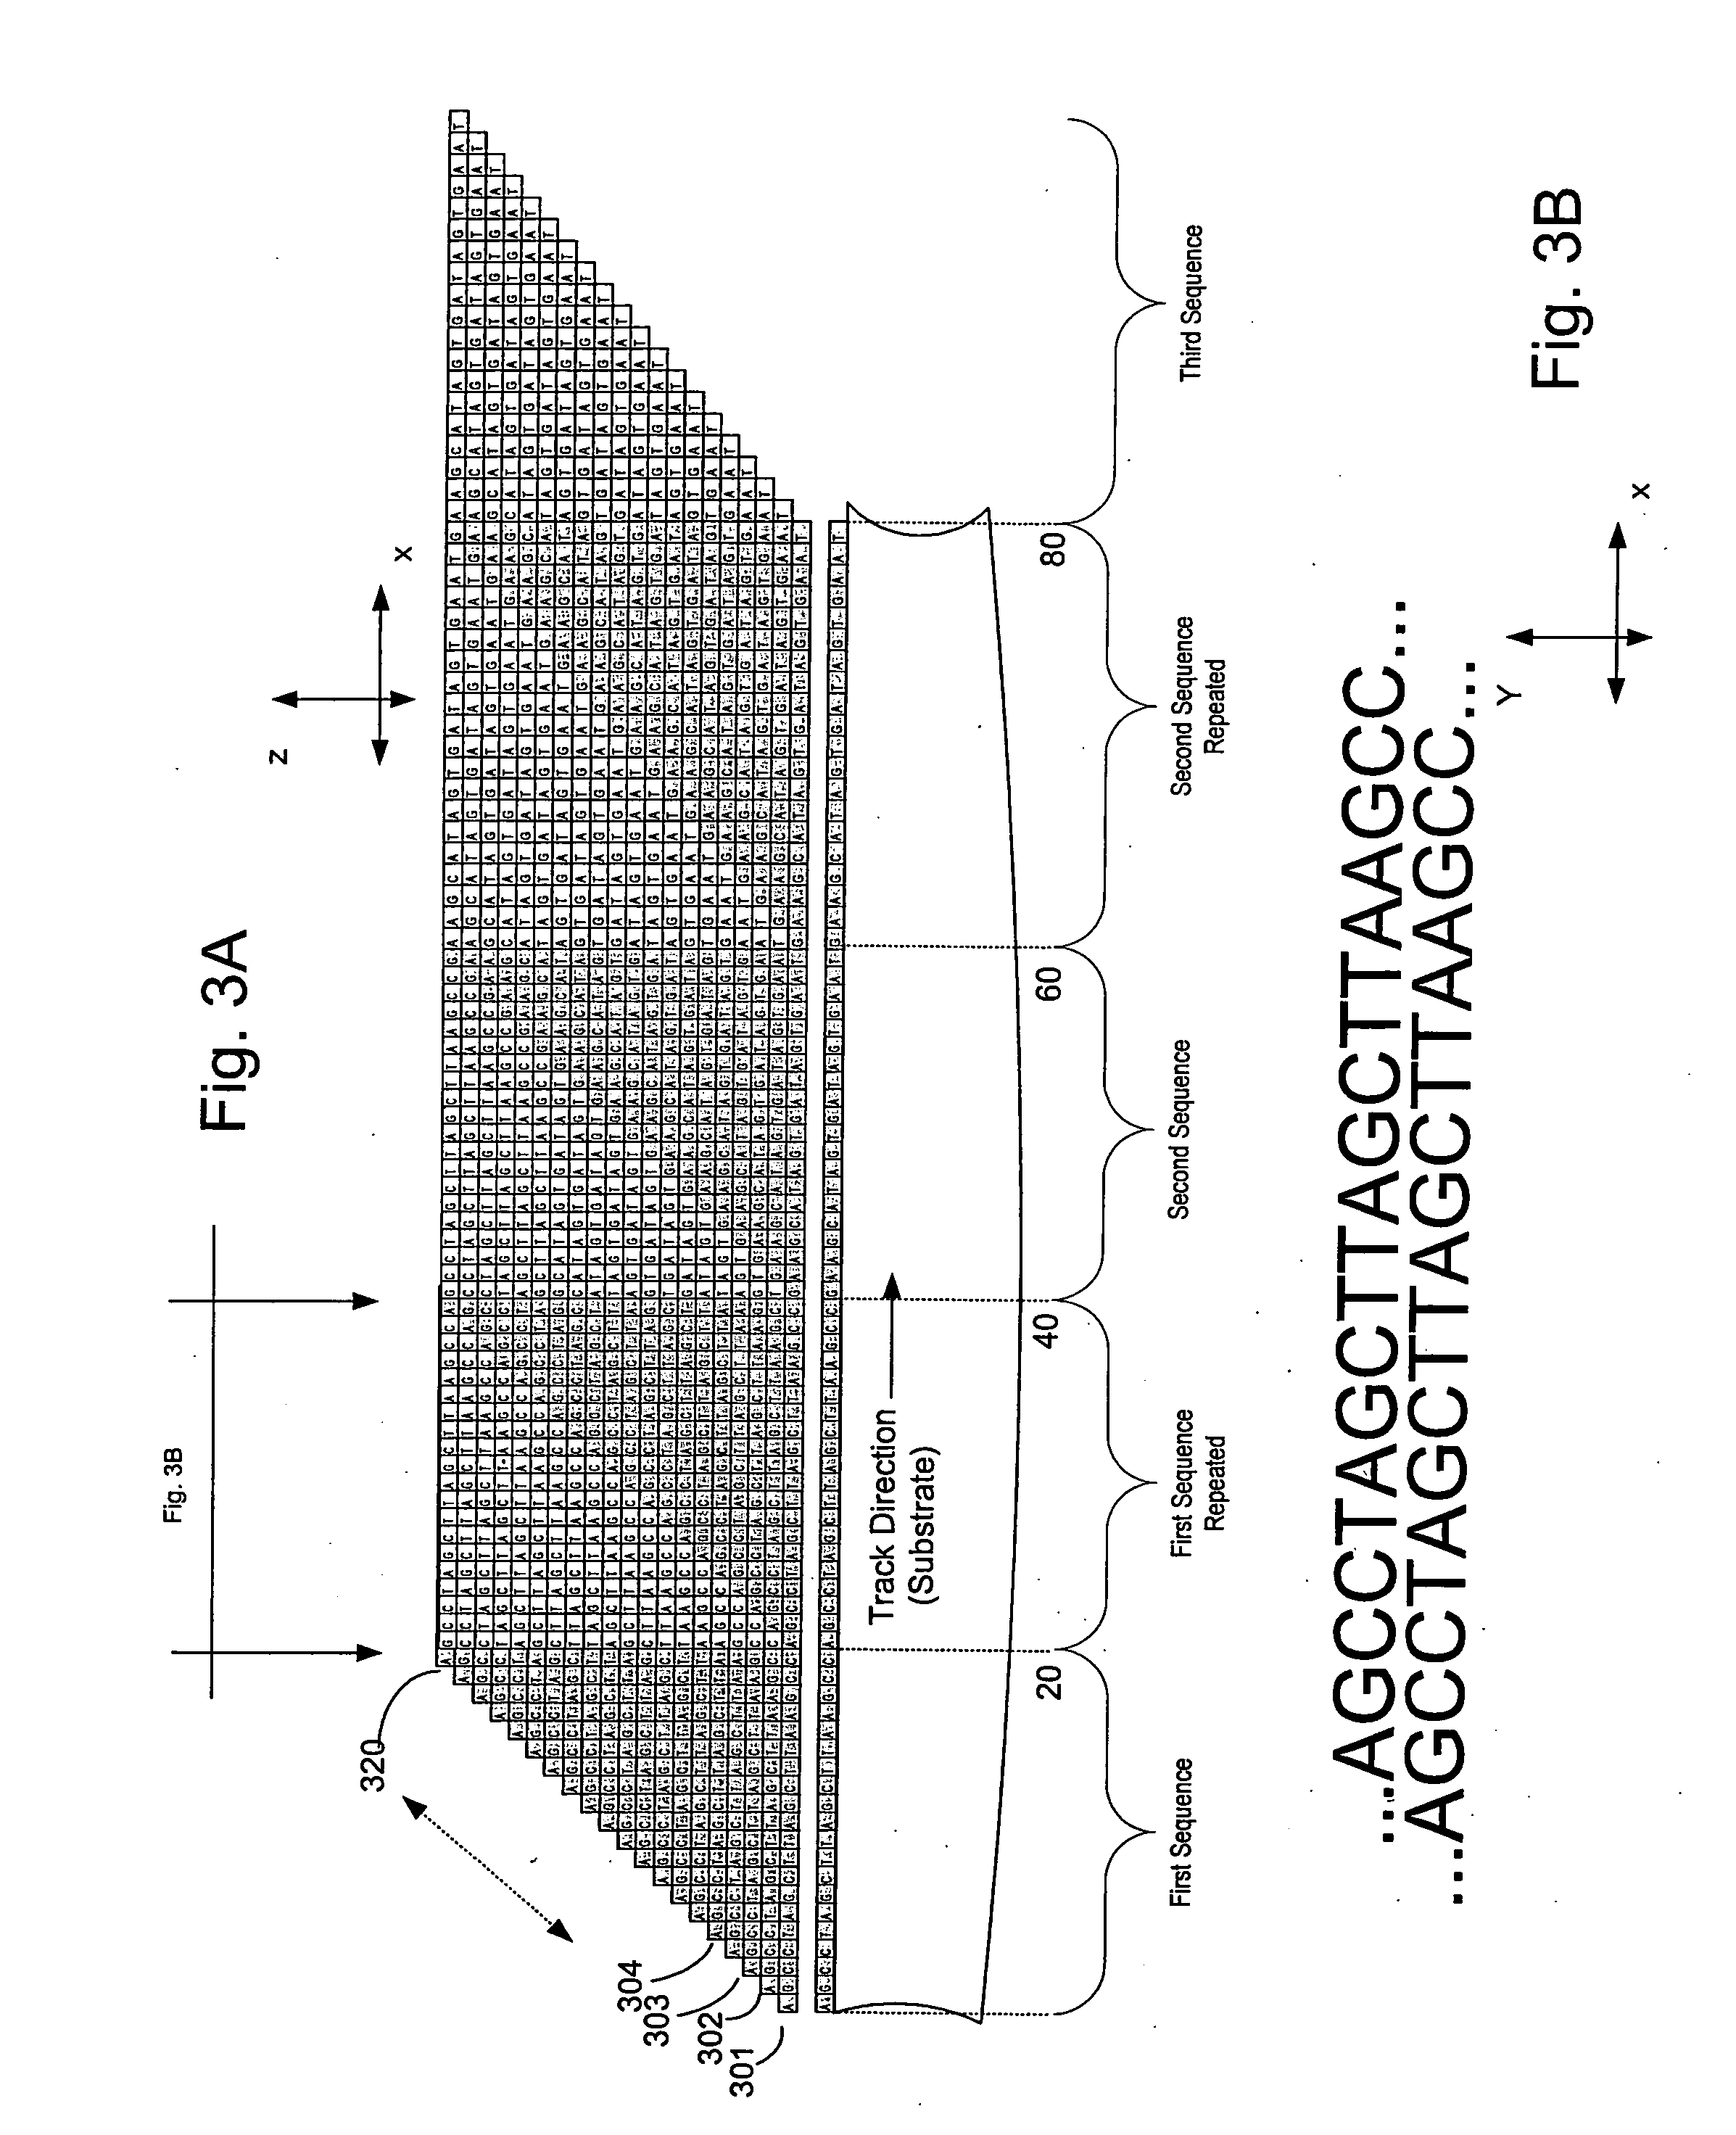 Biodisc microarray and its fabrication, use, and scanning